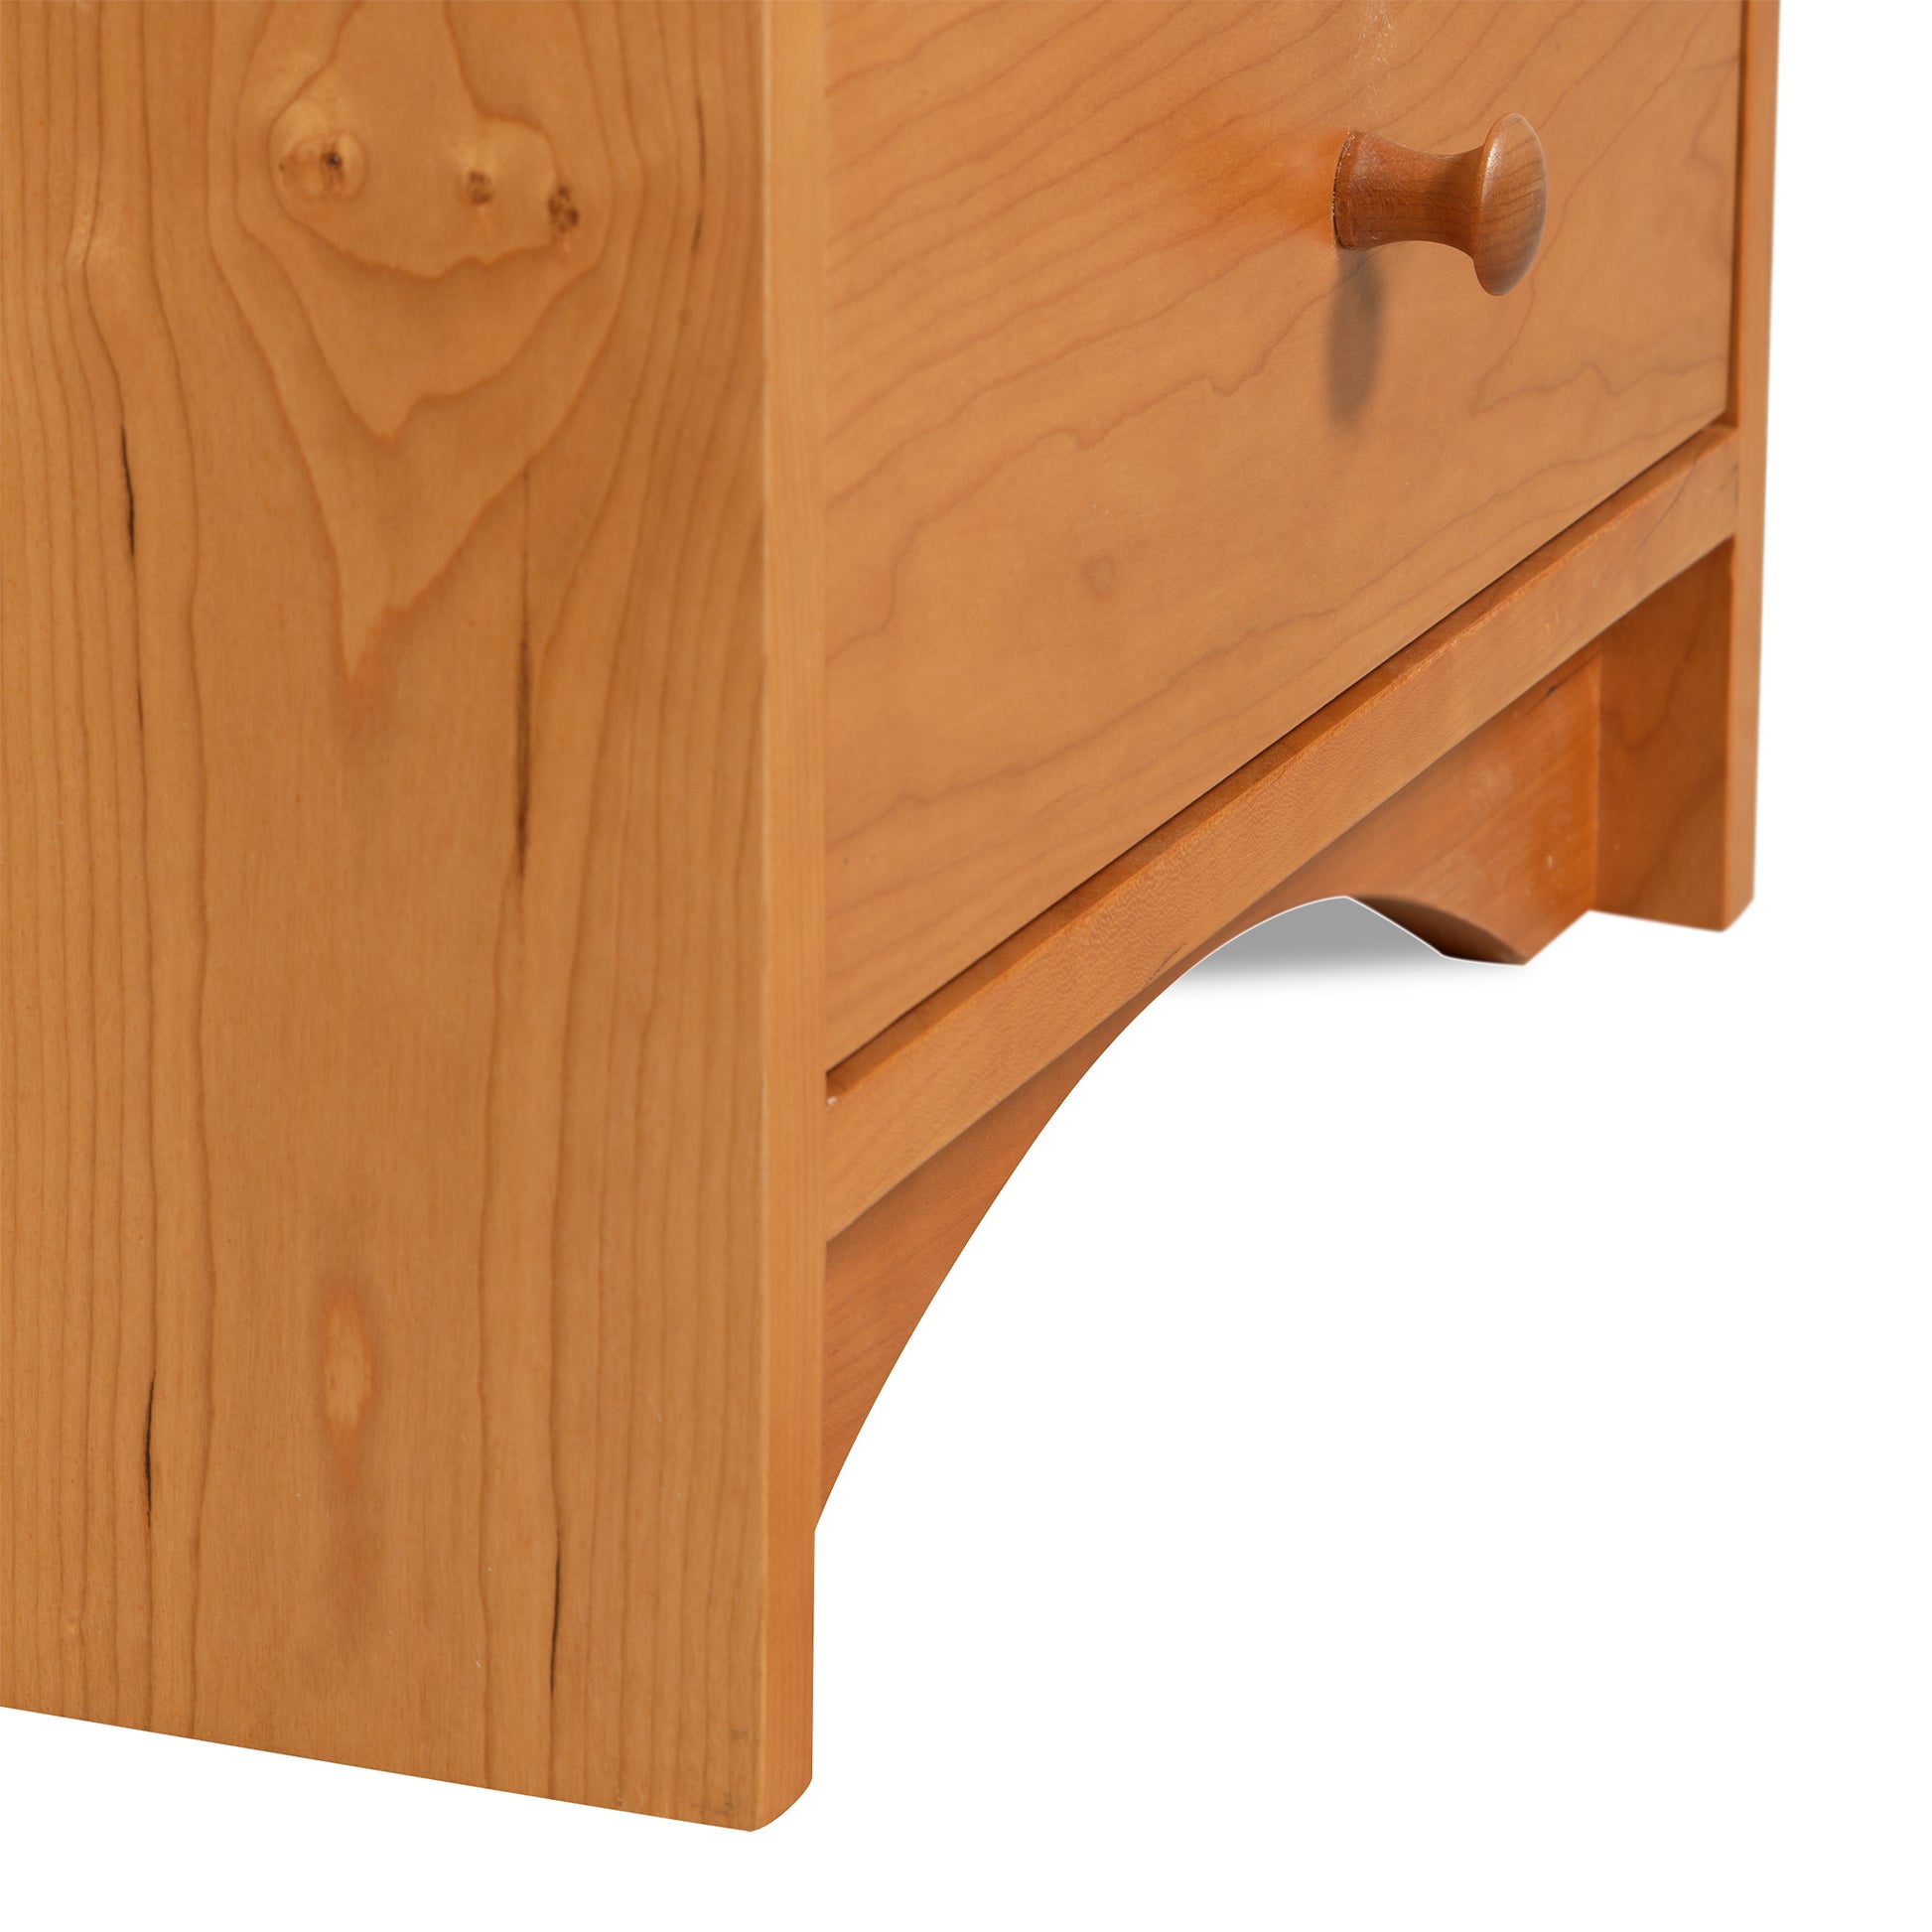 A close up of a wooden nightstand with a drawer.